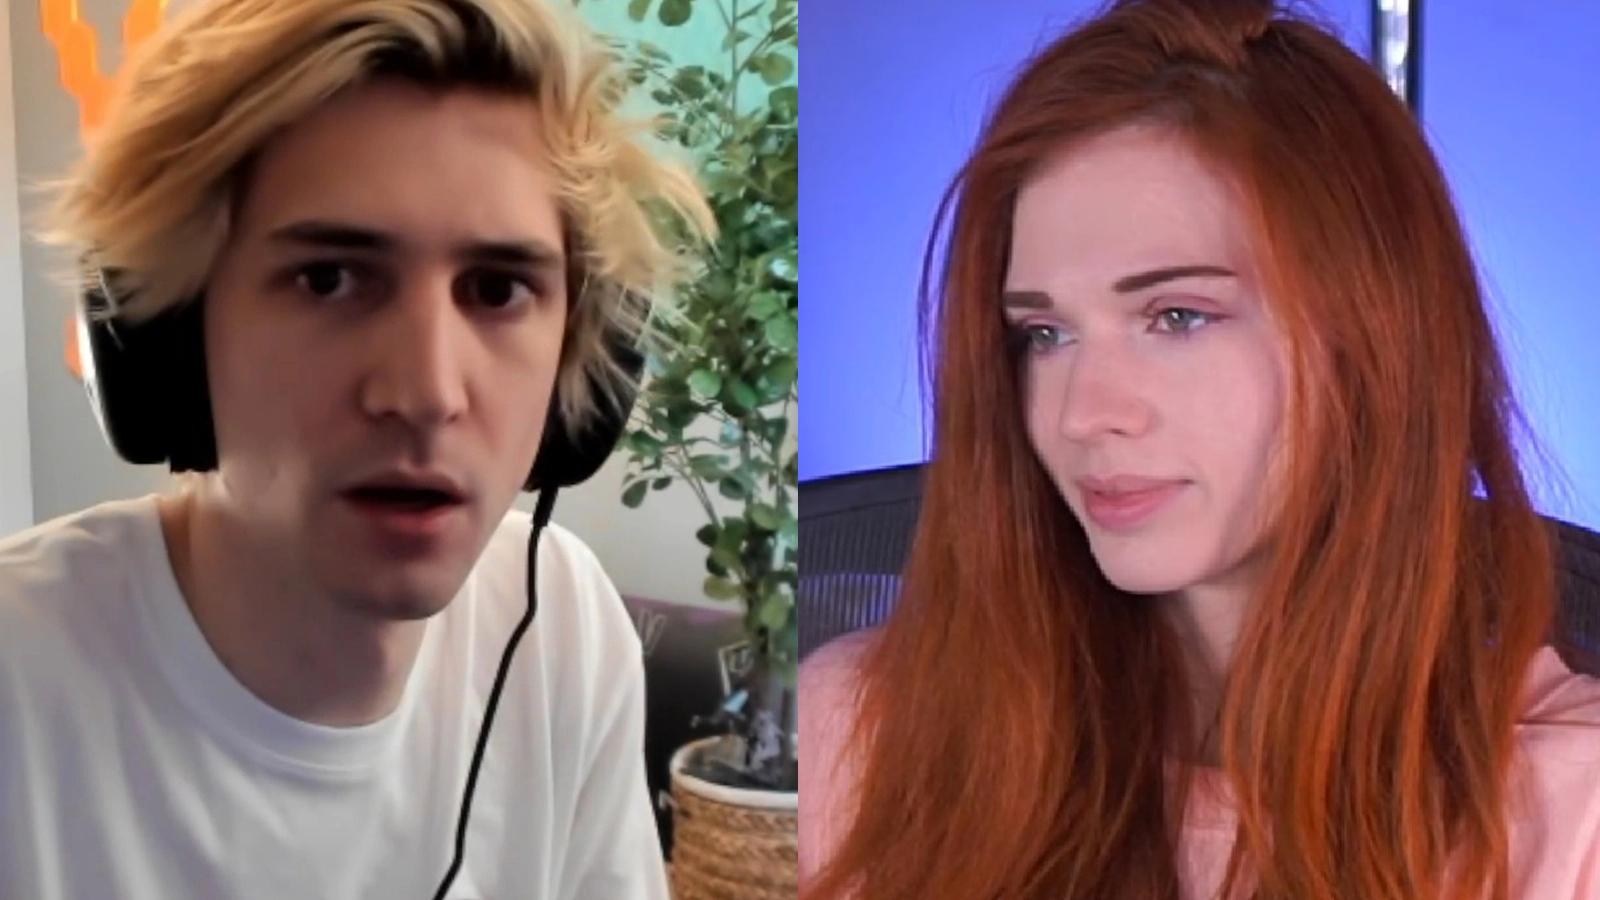 xqc and amouranth in twitch streams